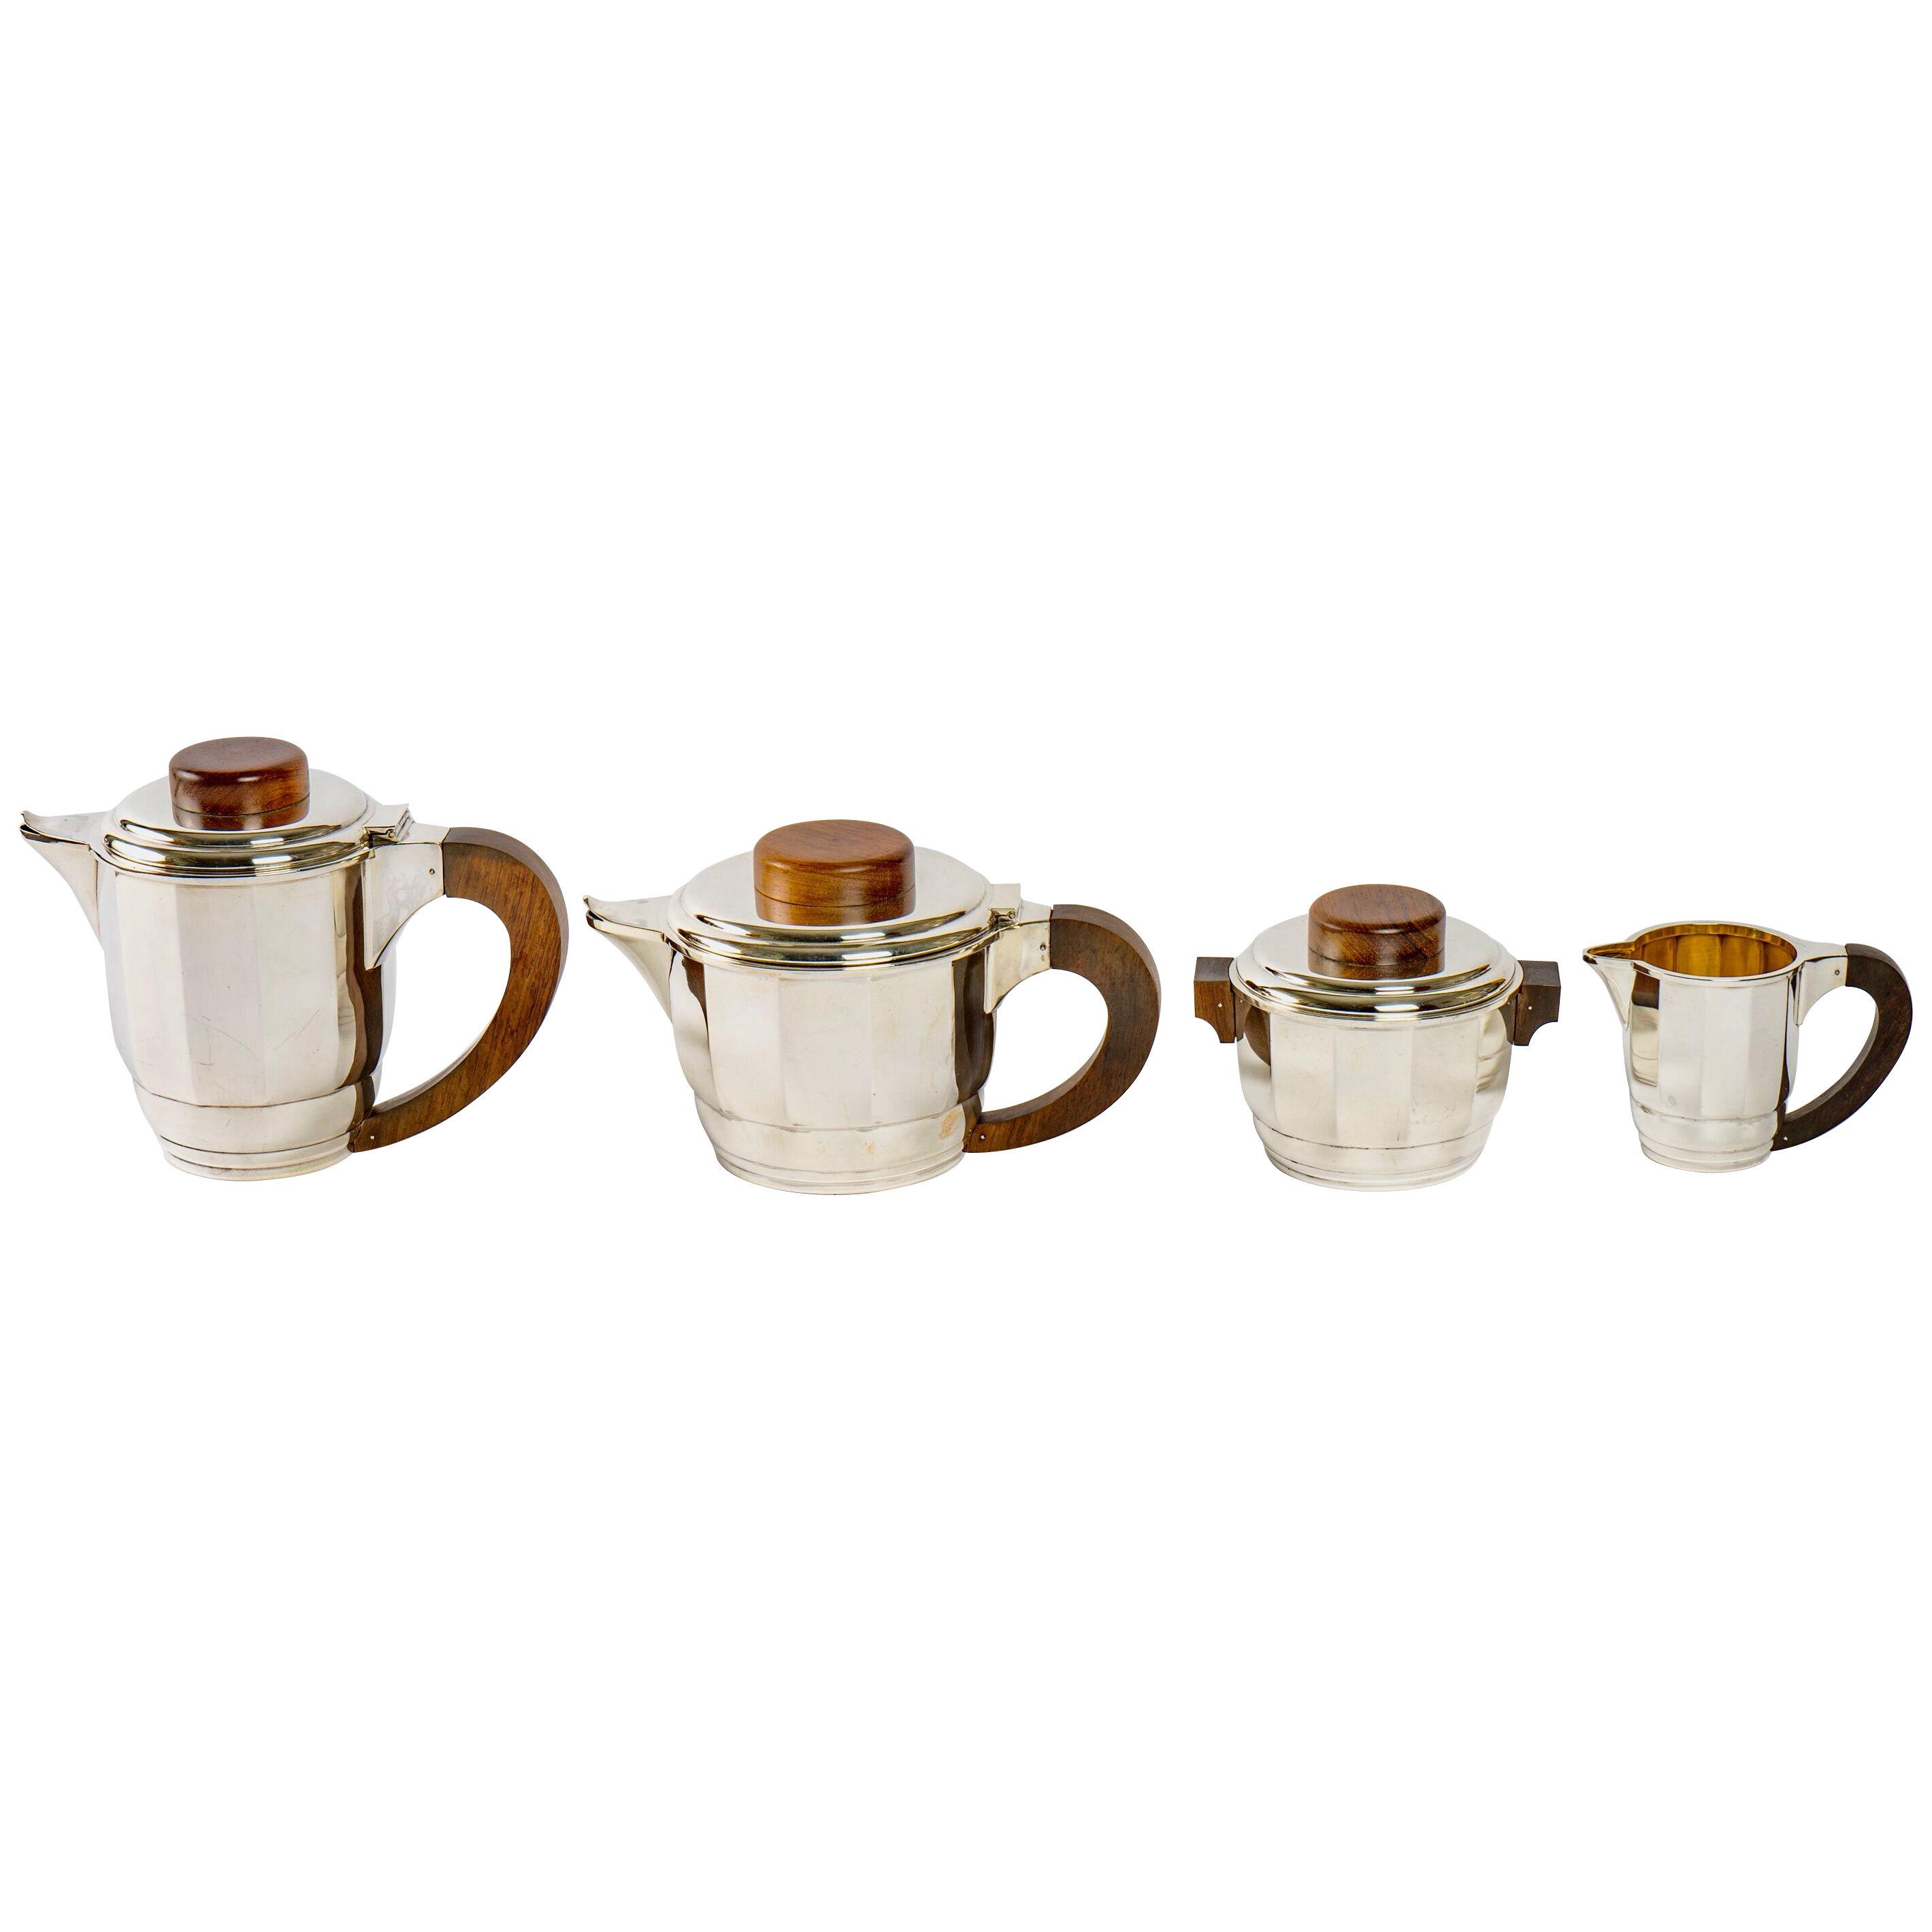 1925 Puiforcat - Tea And Coffee Set In Sterling Silver And Rosewood